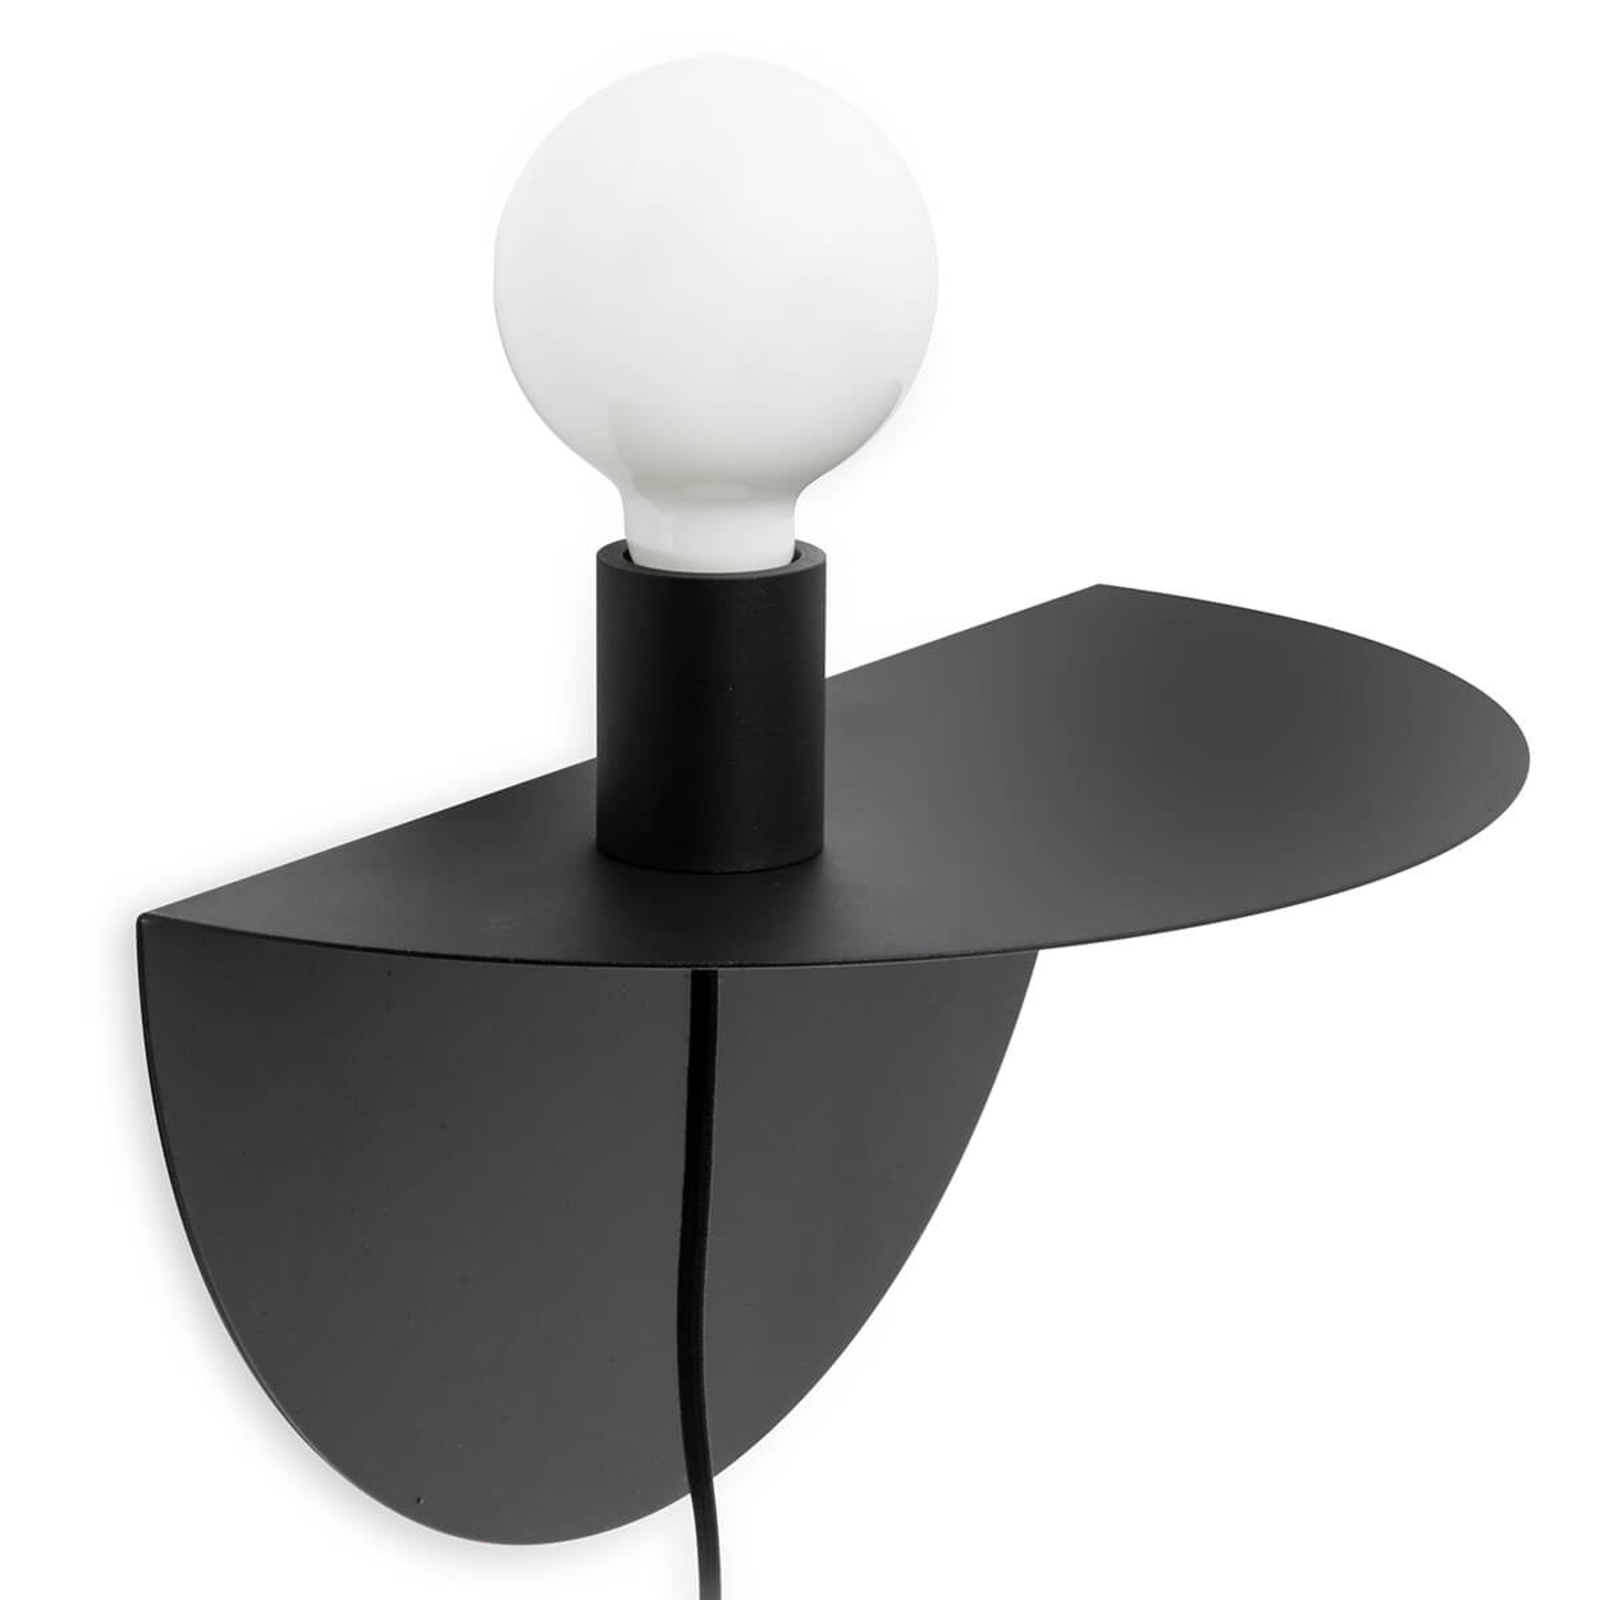 Nit wall lamp that can be used as a bedside table